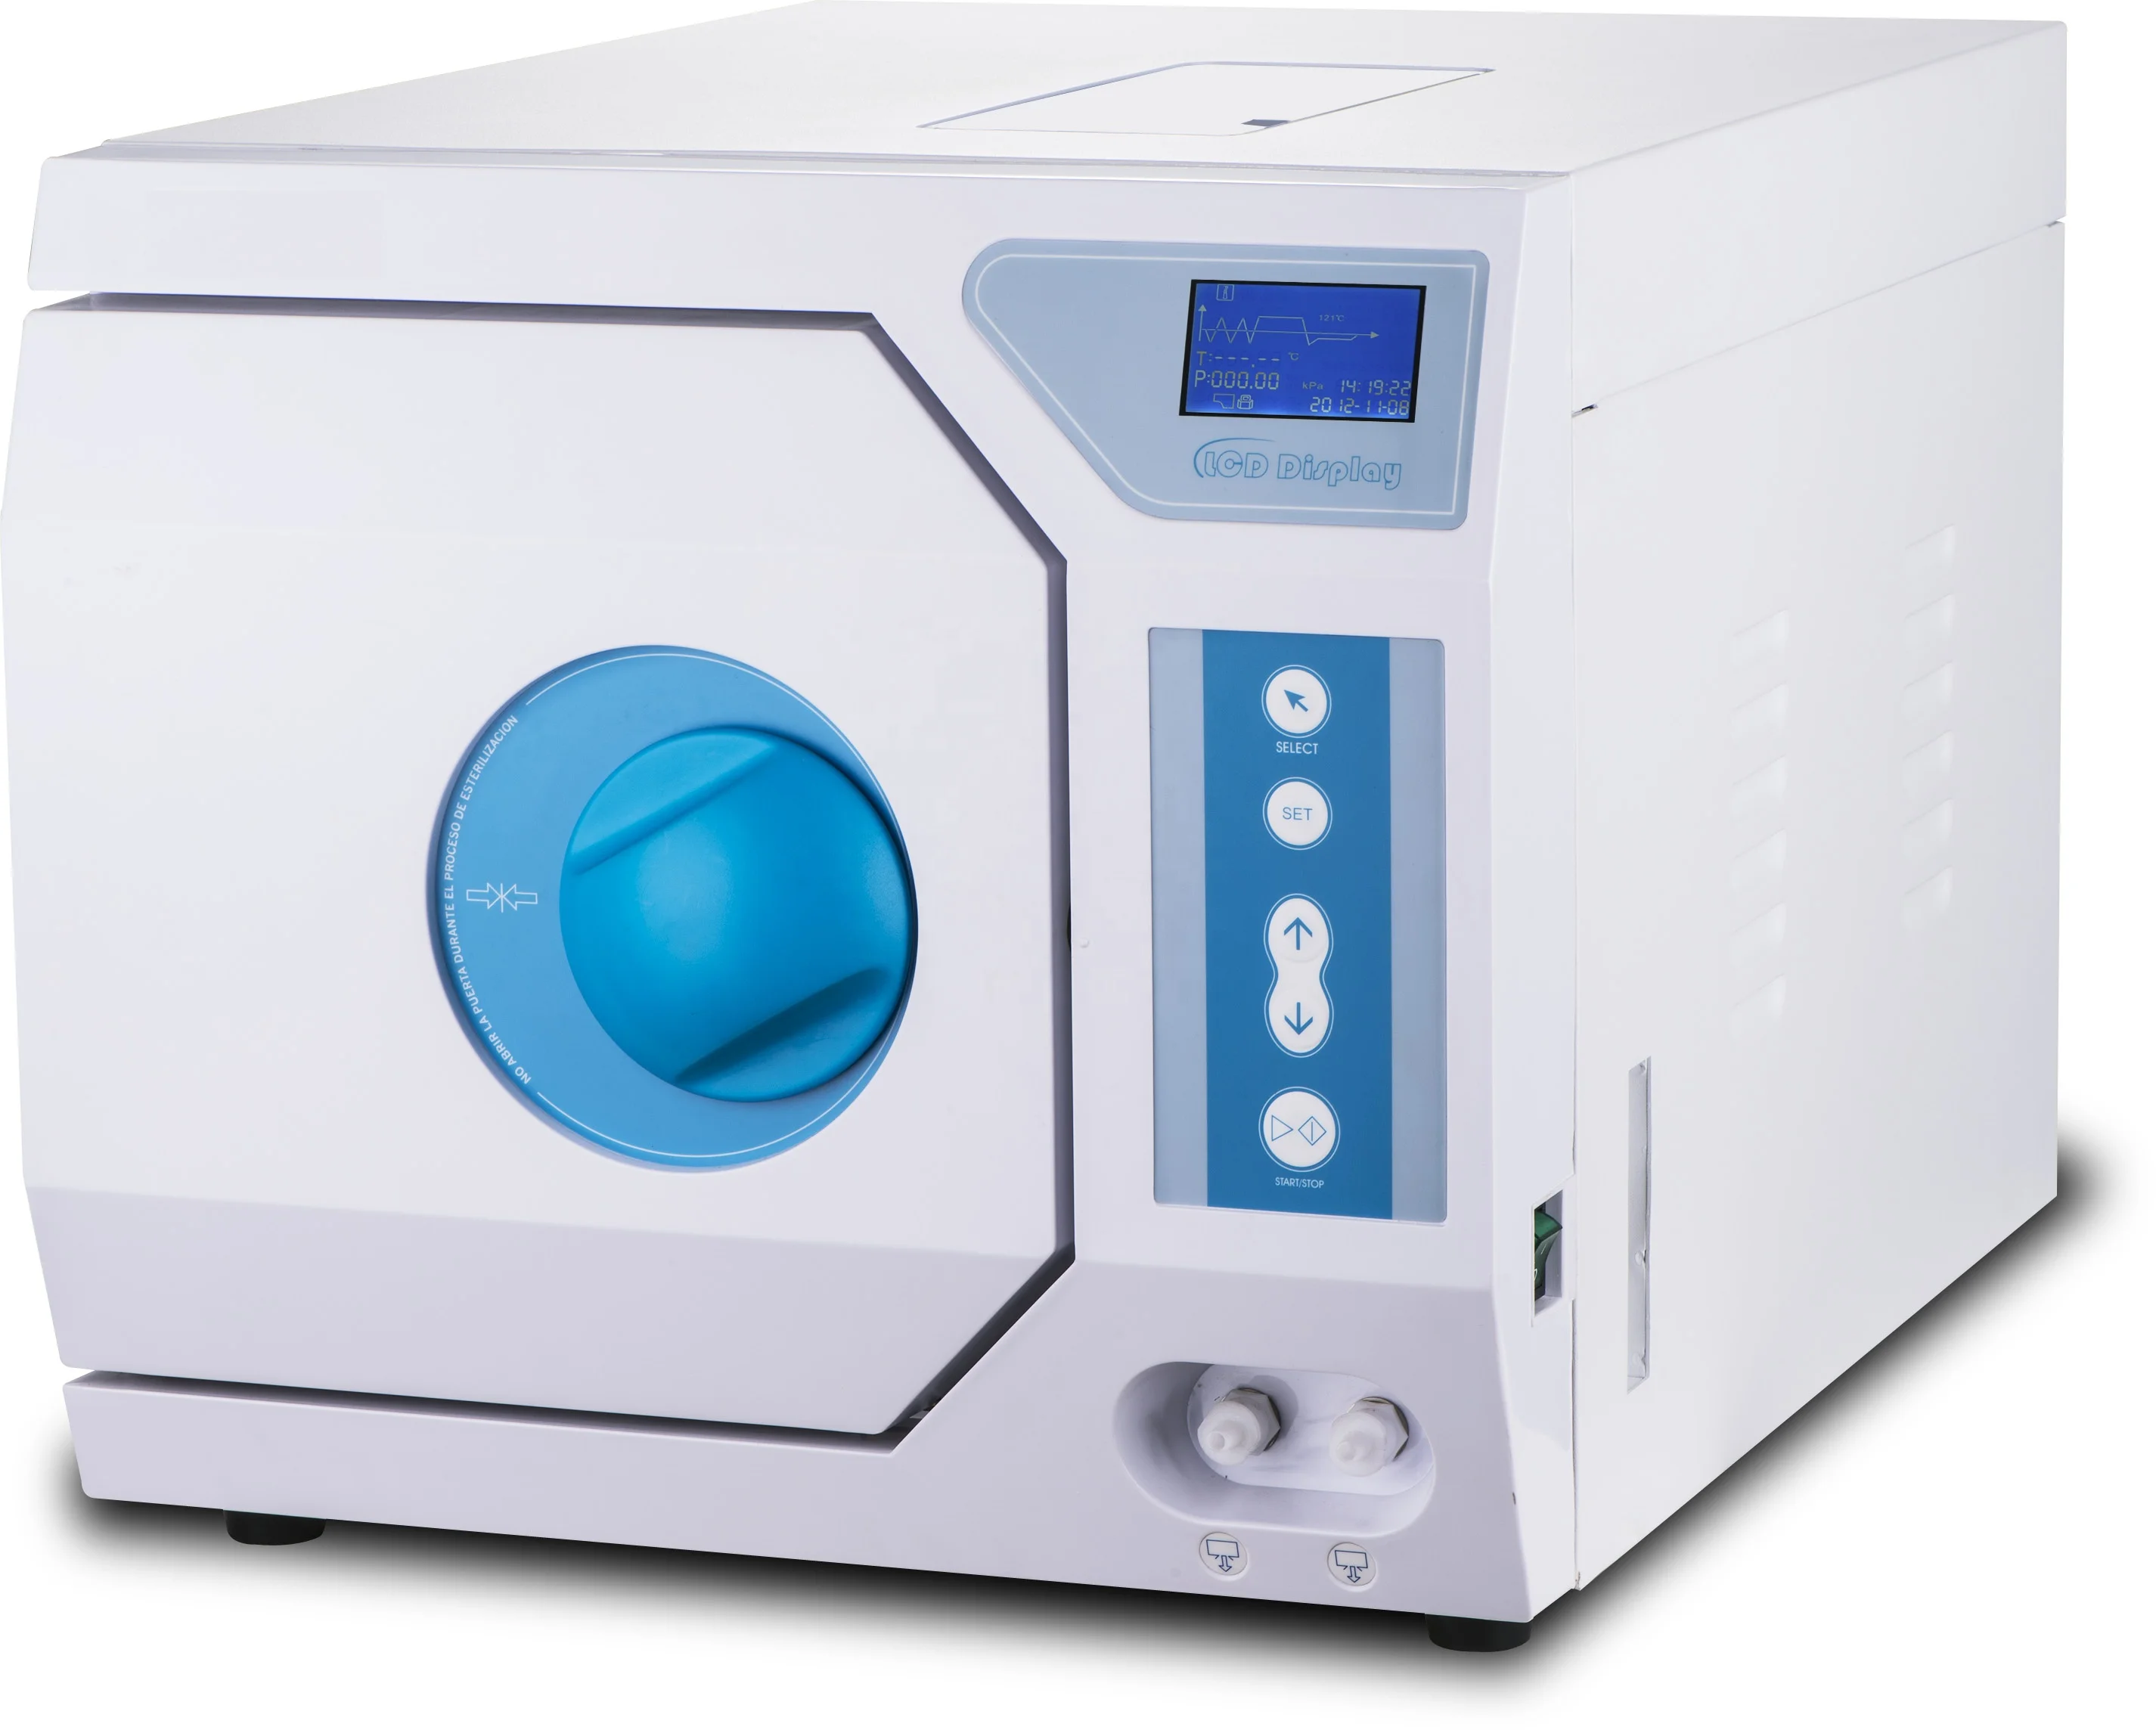 

Class B 23L Full automatic table top autoclave MSLTA03B